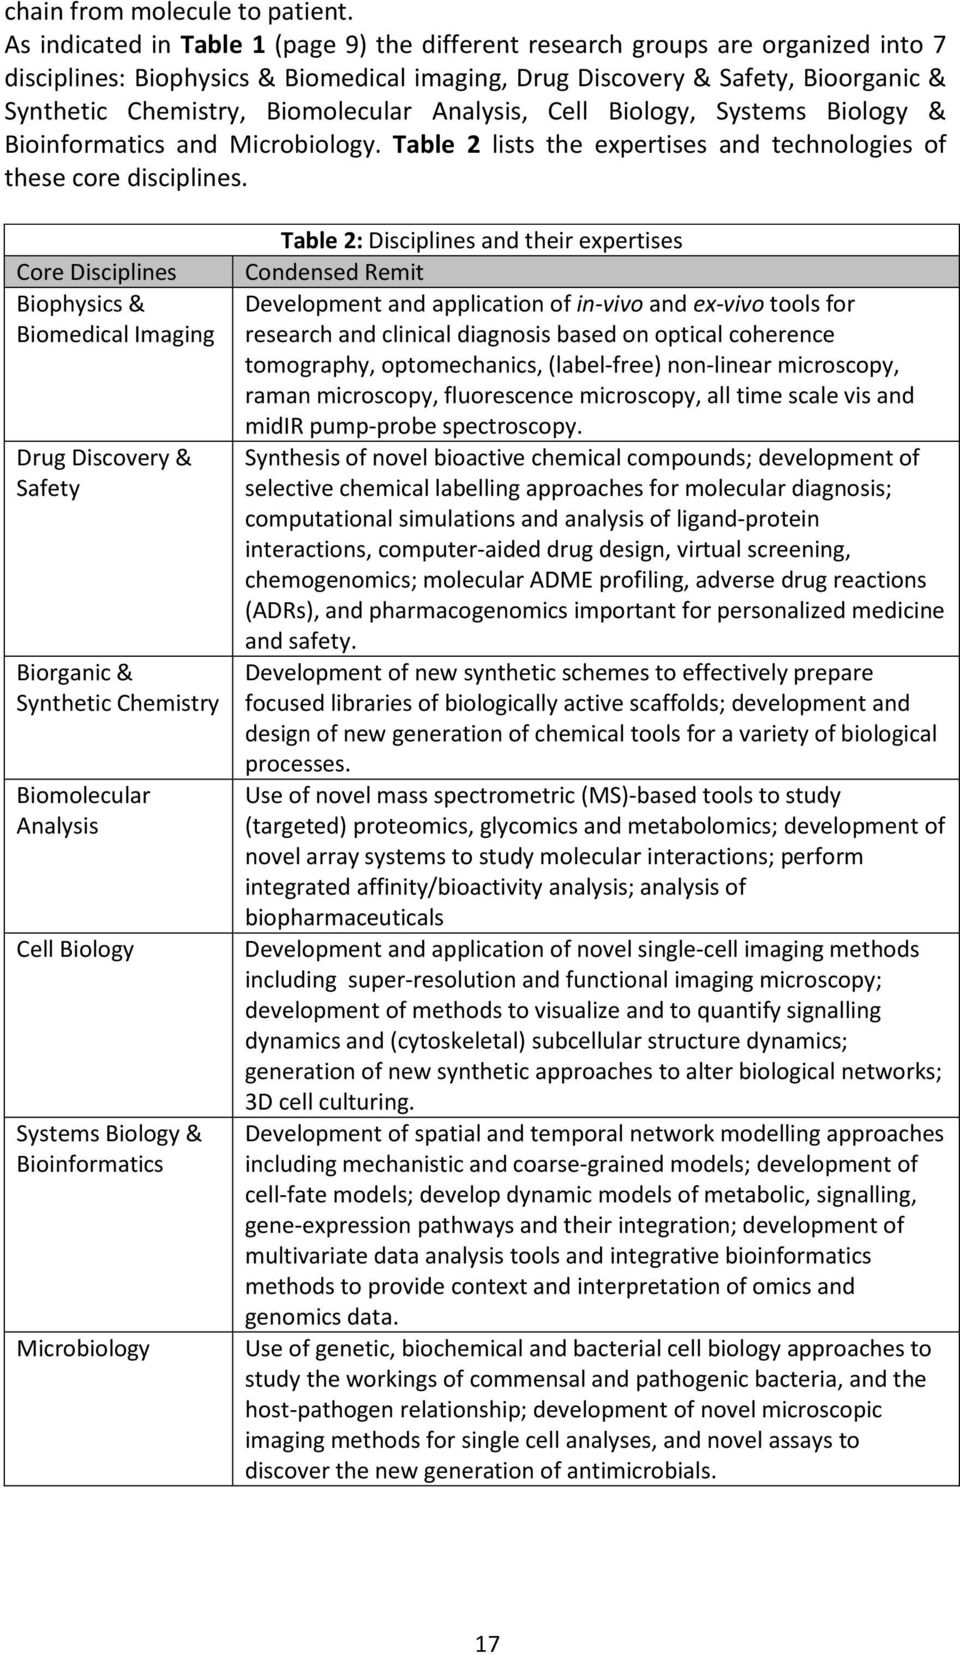 Biomolecular Analysis, Cell Biology, Systems Biology & Bioinformatics and Microbiology. Table 2 lists the expertises and technologies of these core disciplines.